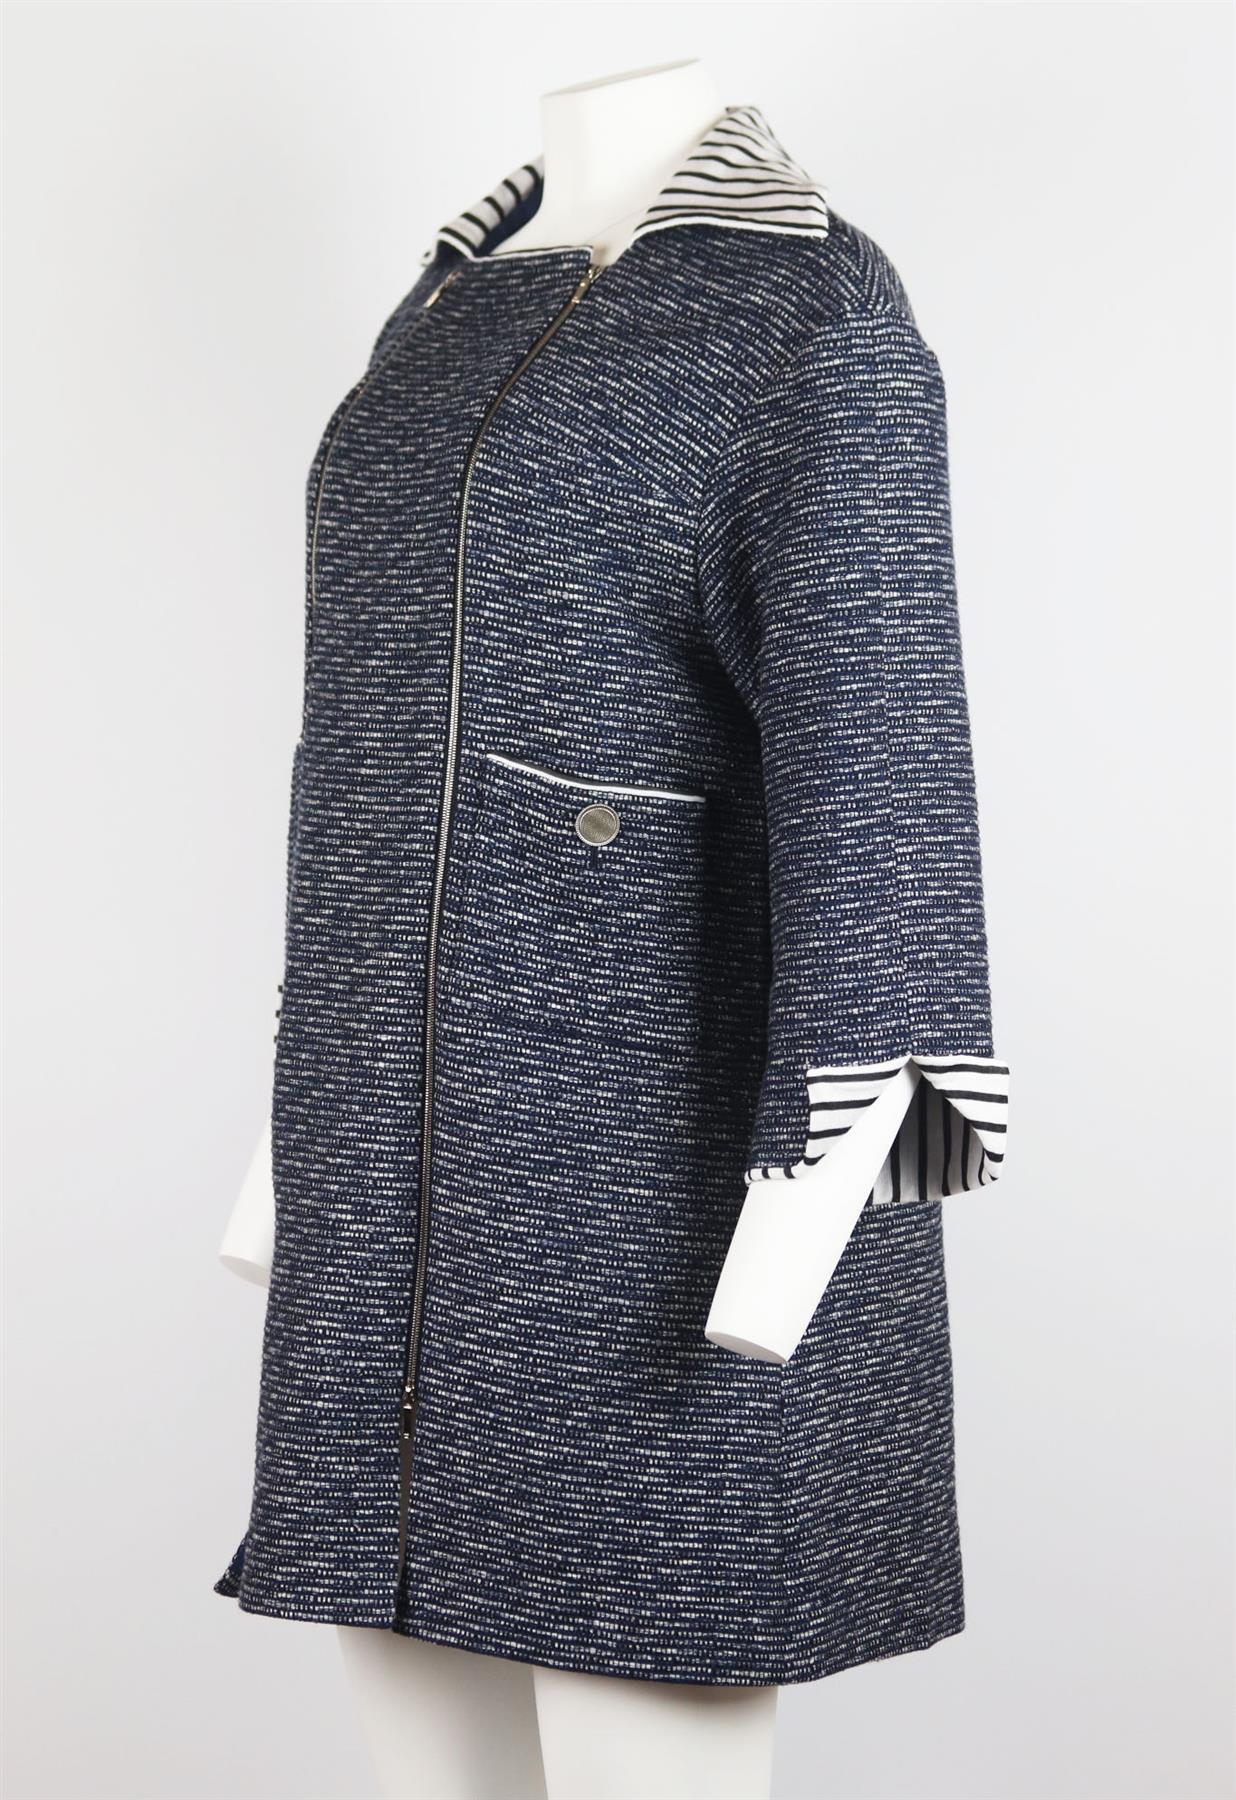 Part of SS17, this lightweight Chanel coat has been made from tactile cotton-blend tweed that's woven with the brand's signature multi-layered textures and colours, it's designed for an oversized fit and has breton style striped cotton-jersey panels